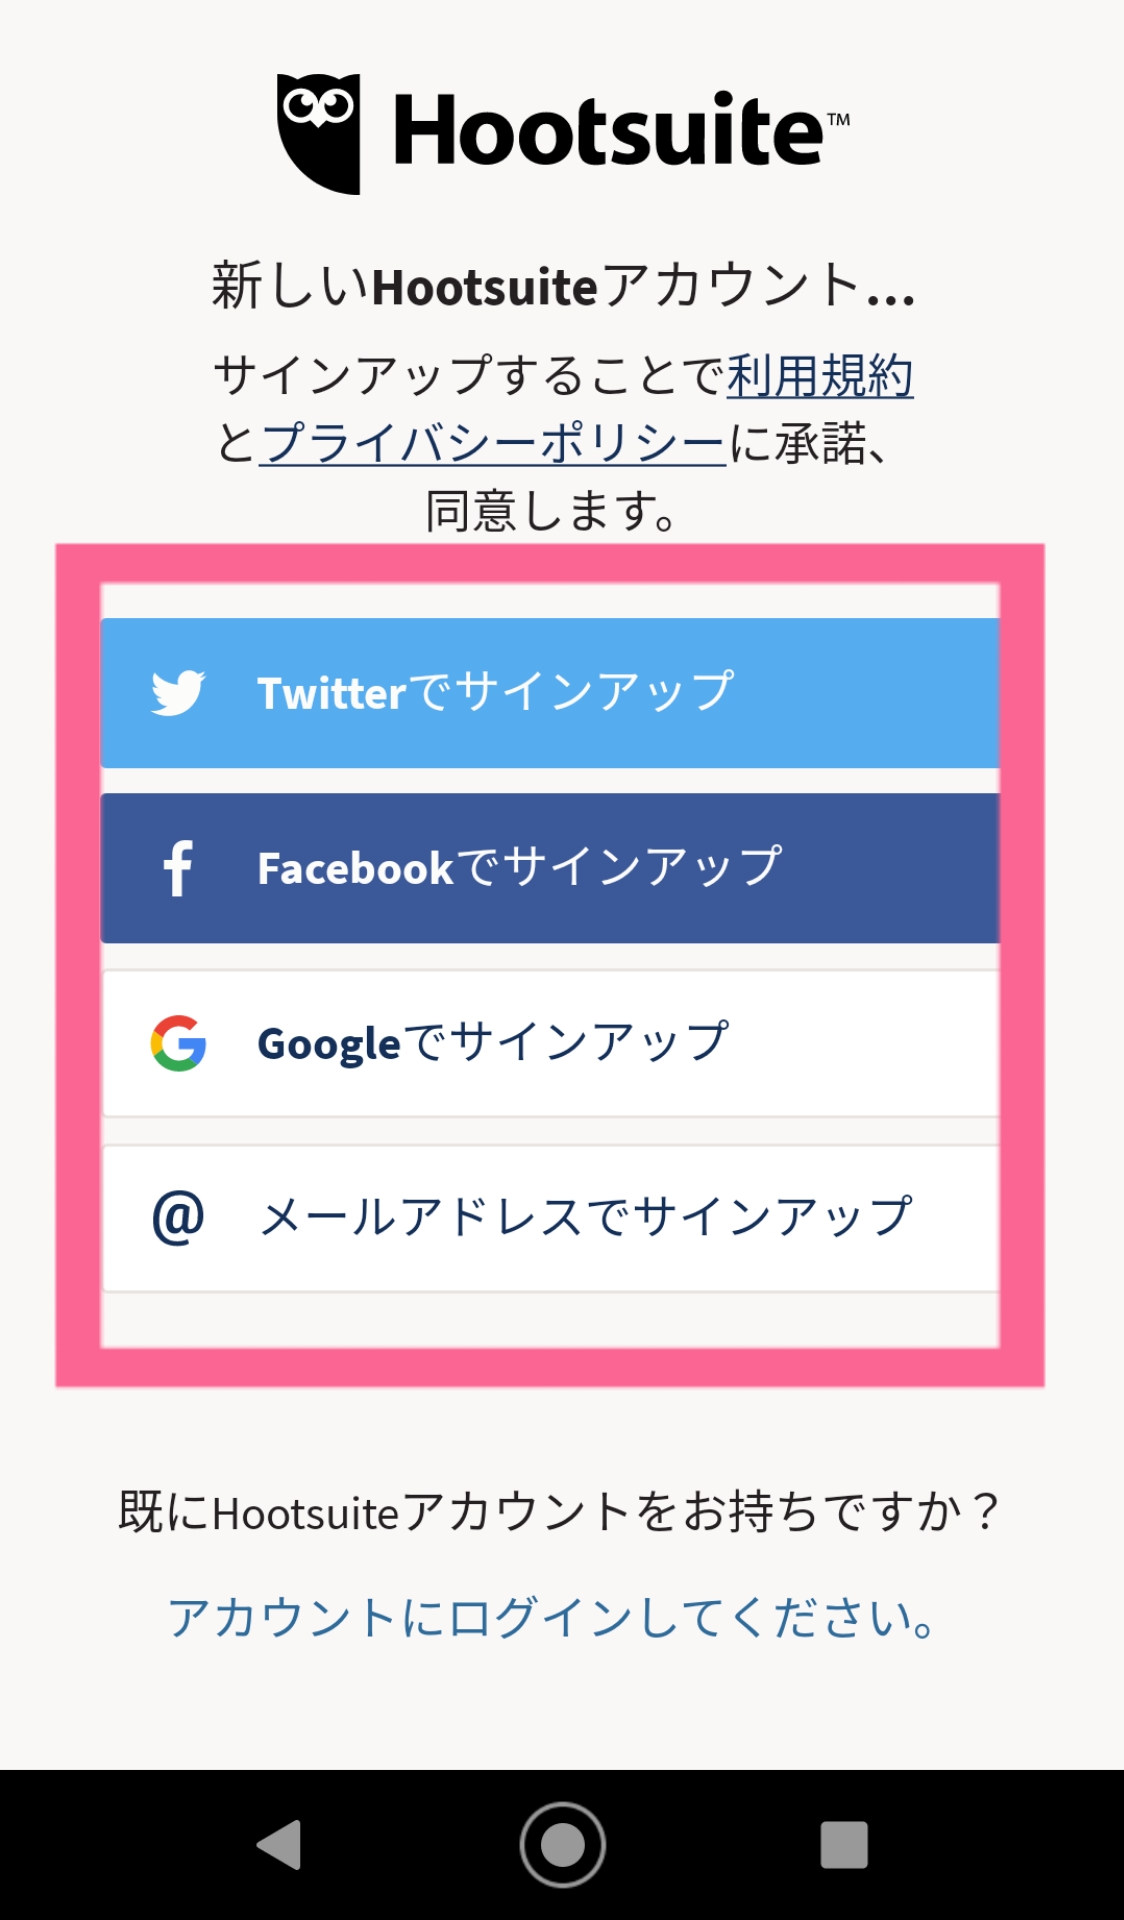 Hootsuite　アプリ　SNS　選択